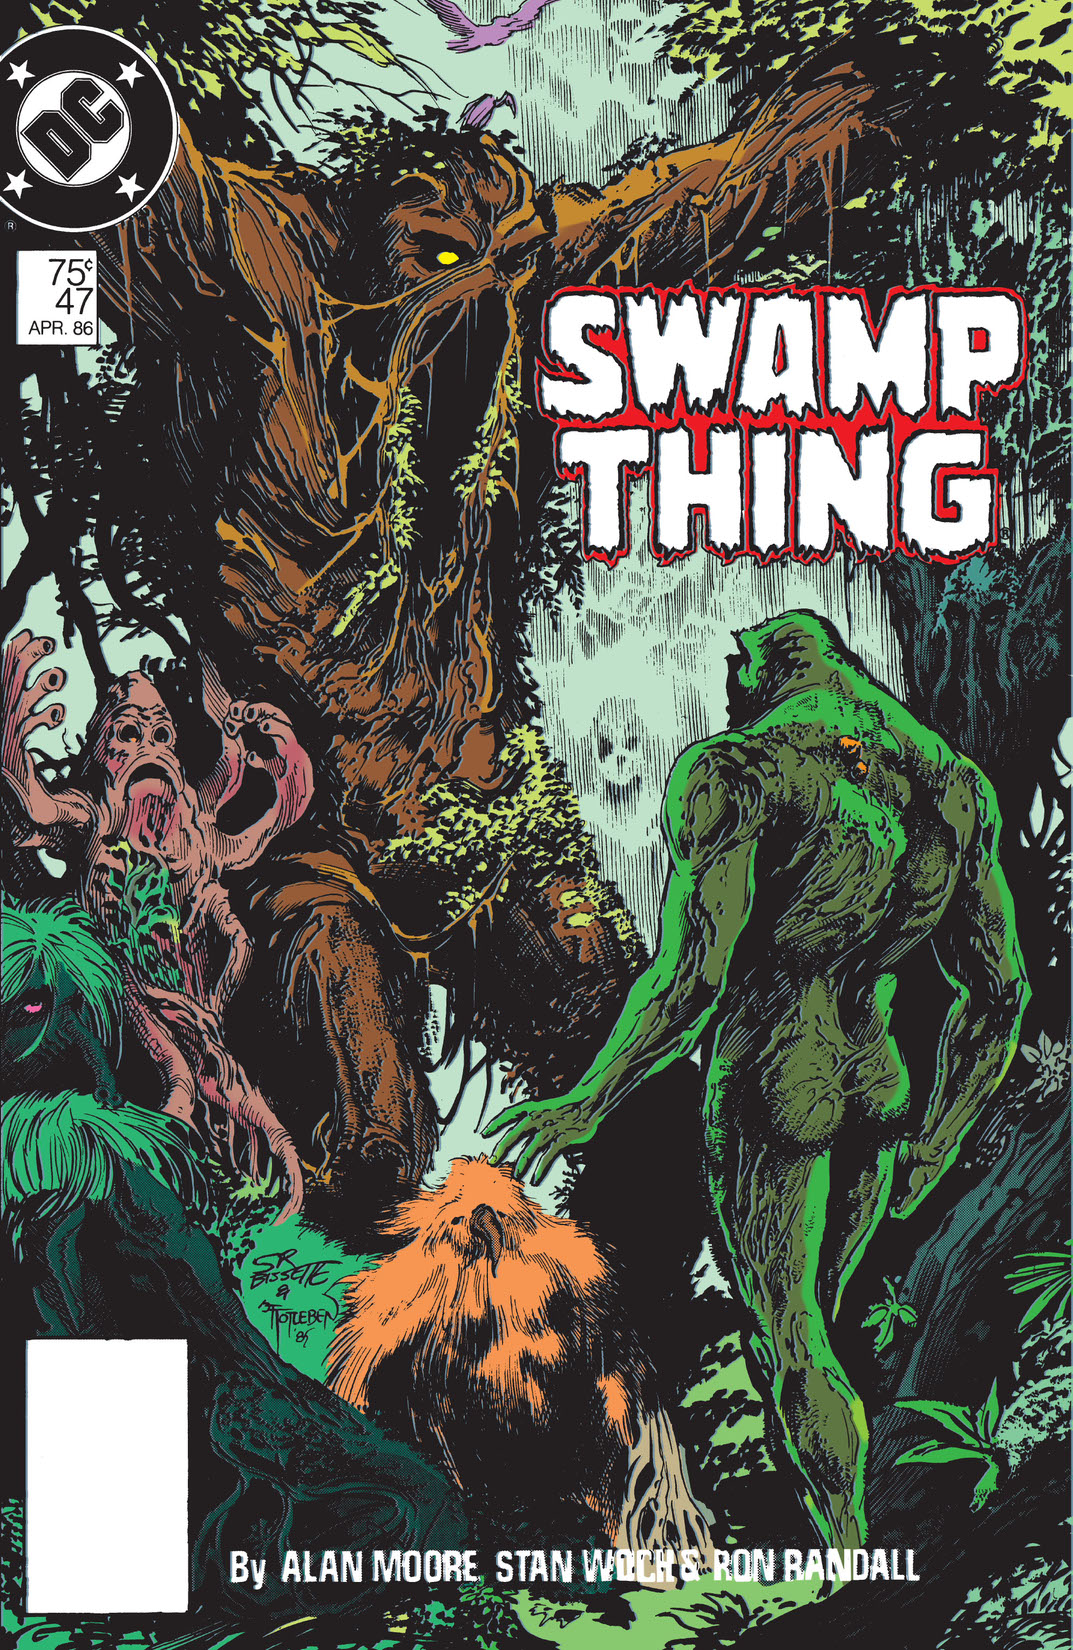 Swamp Thing (1985-) #47 preview images